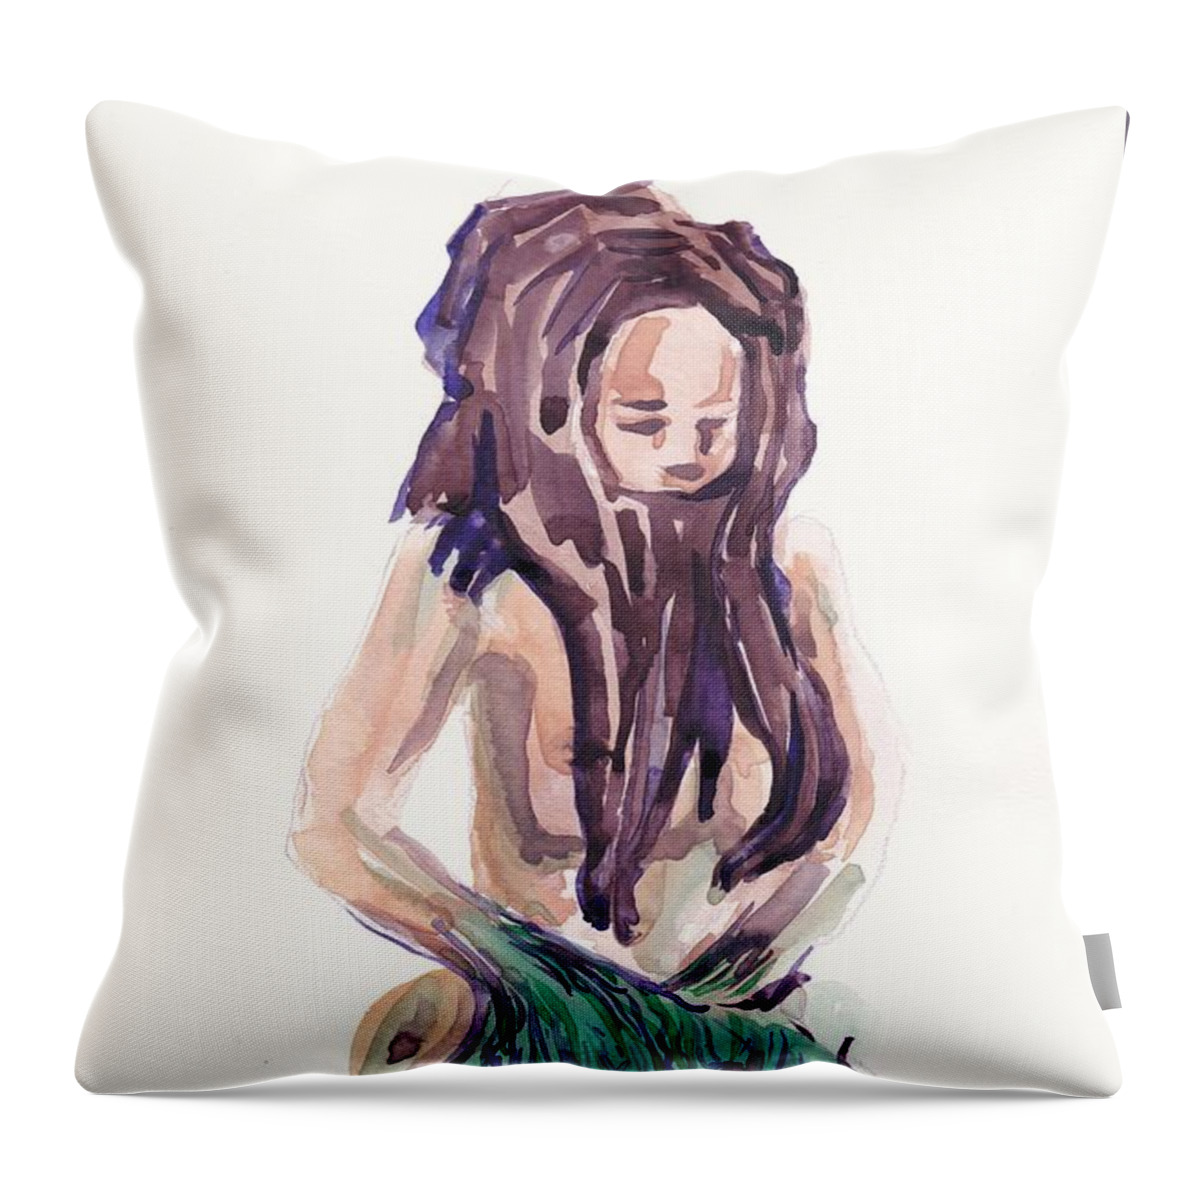 Miniature Throw Pillow featuring the painting Forert Spirit by George Cret